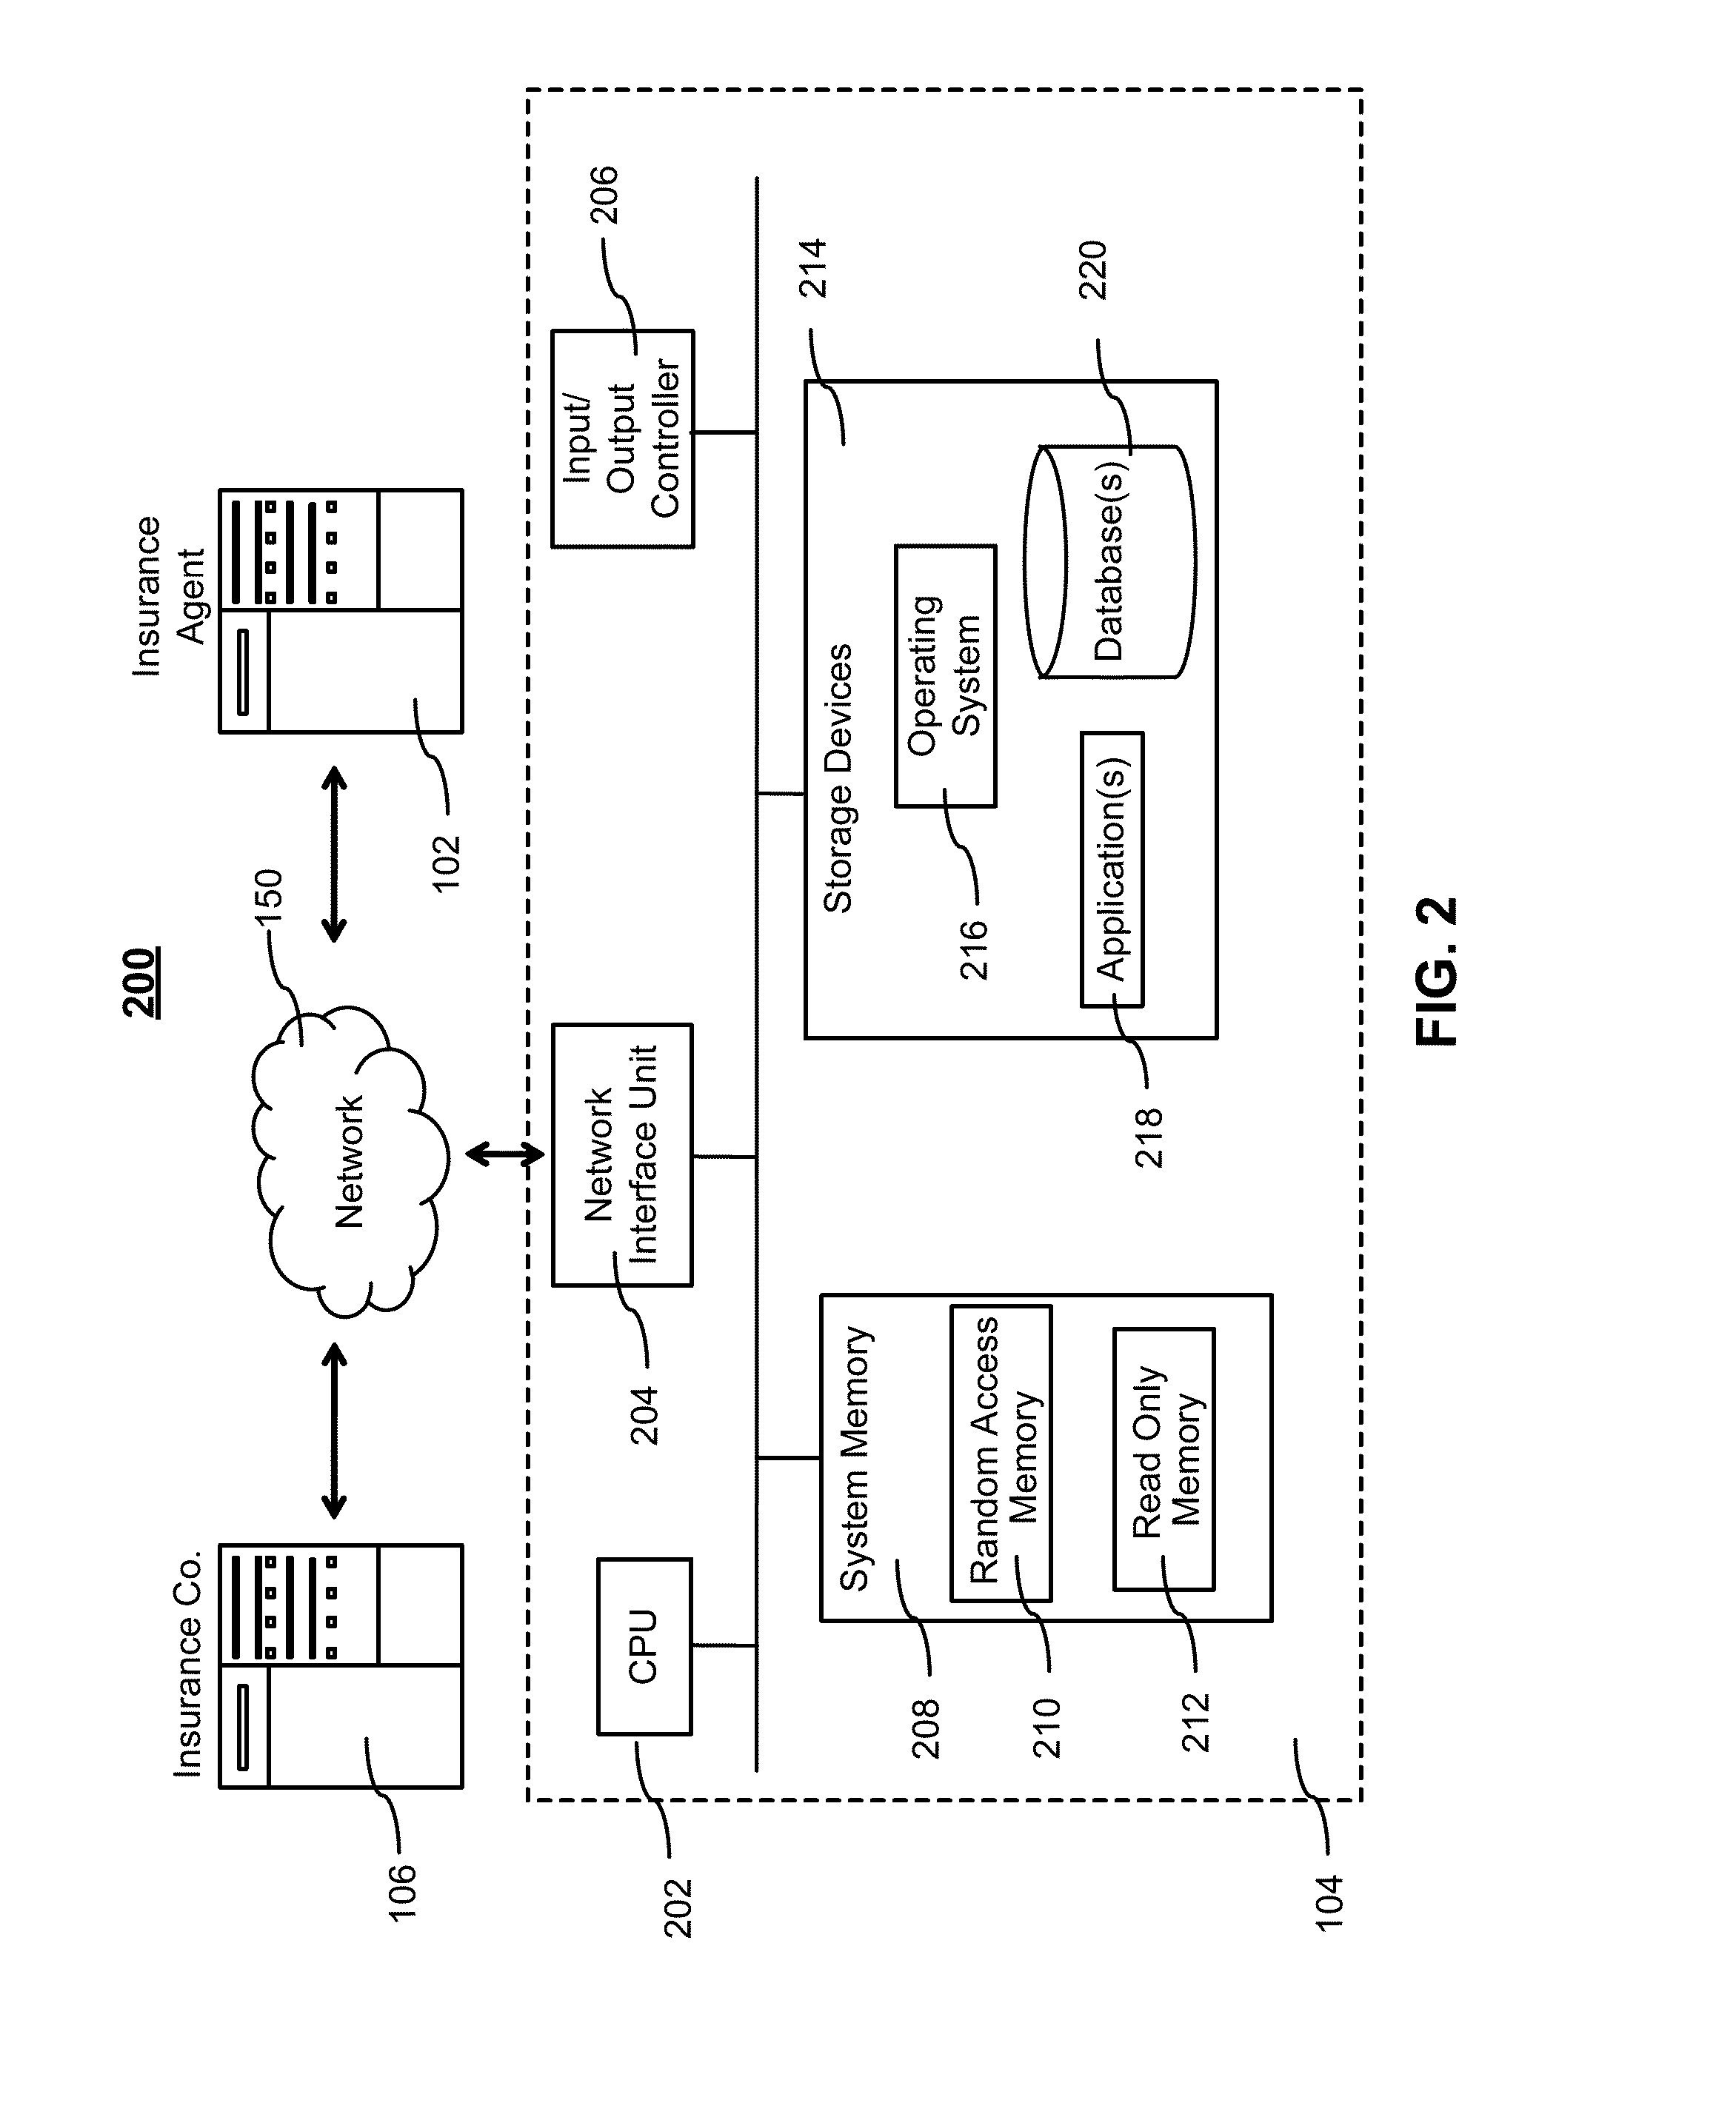 System and method for determination of insurance classification of entities